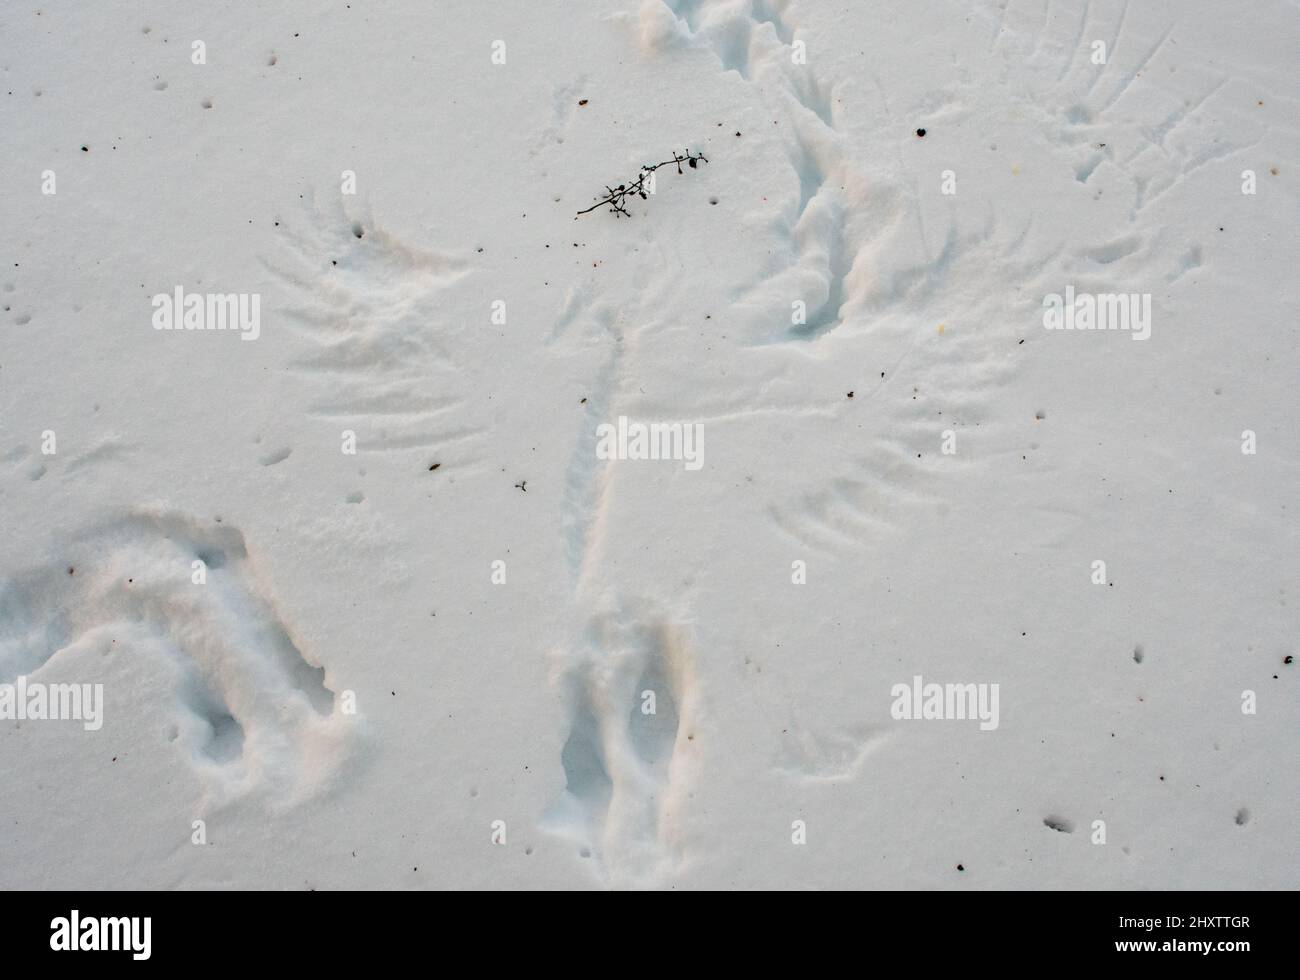 Wing prints and tracks of a bird of prey in snow Stock Photo